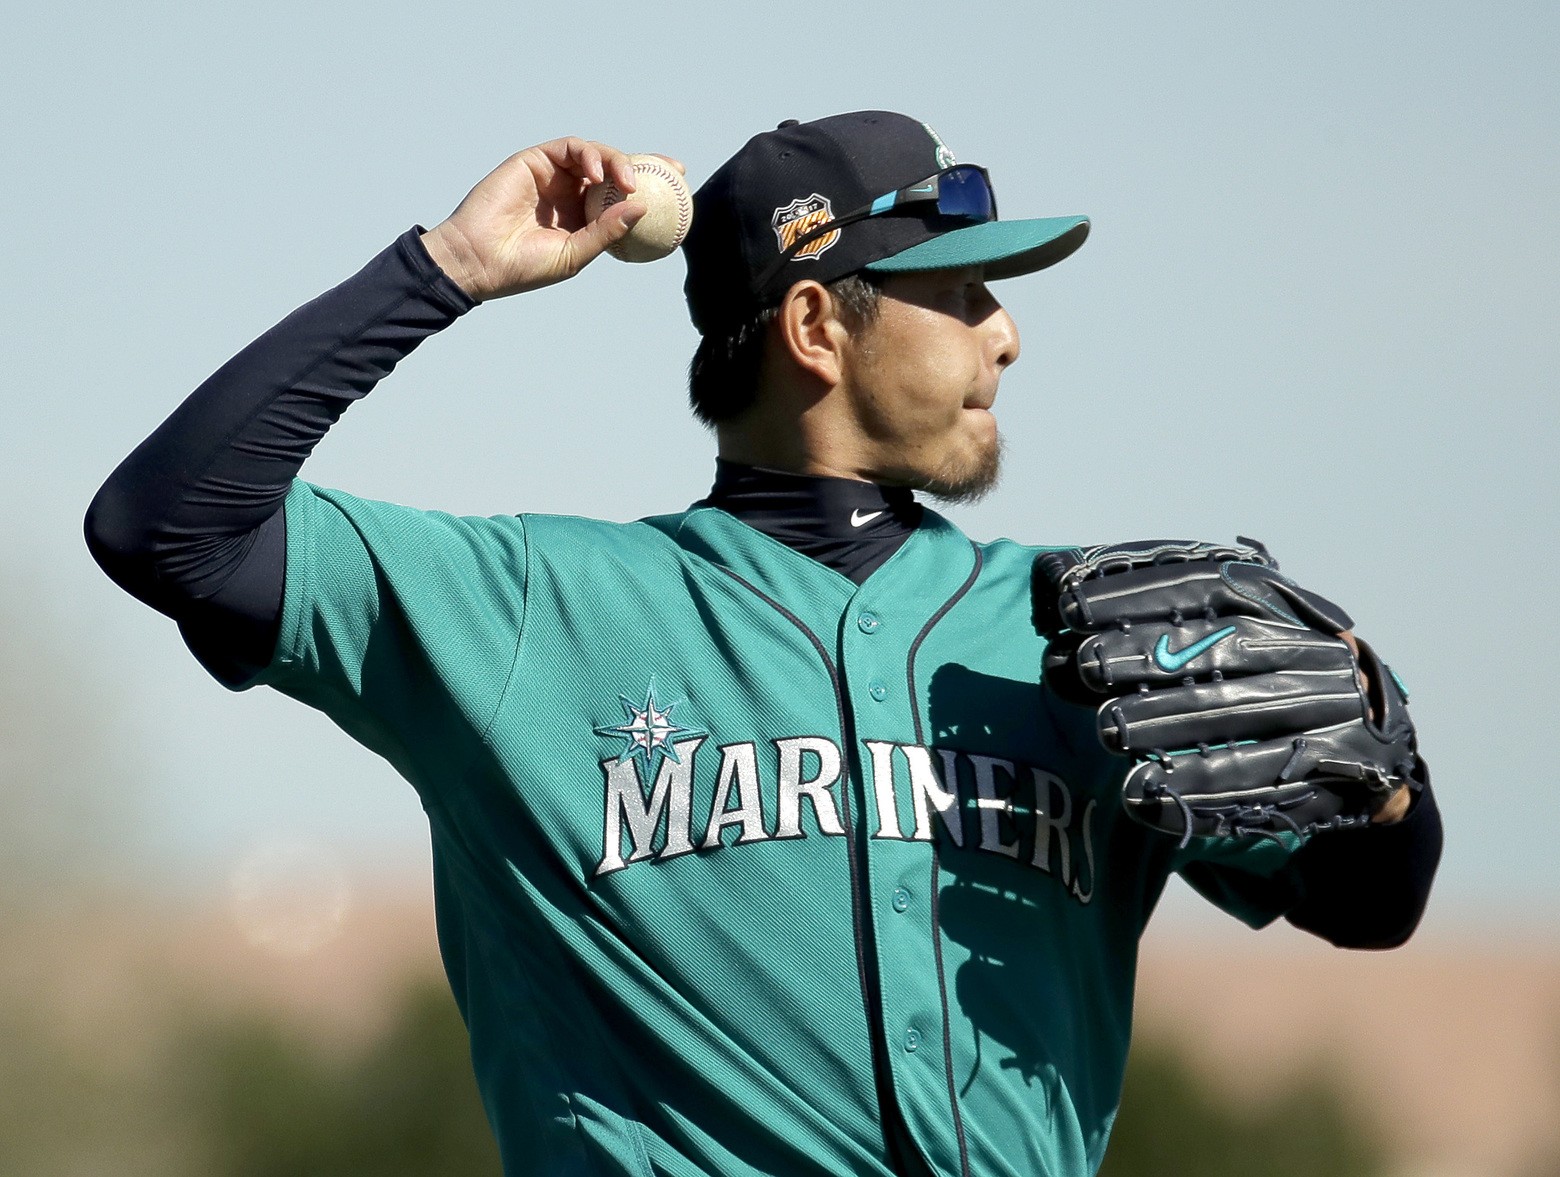 Mariners extend 22 nonroster invitations to their big league spring